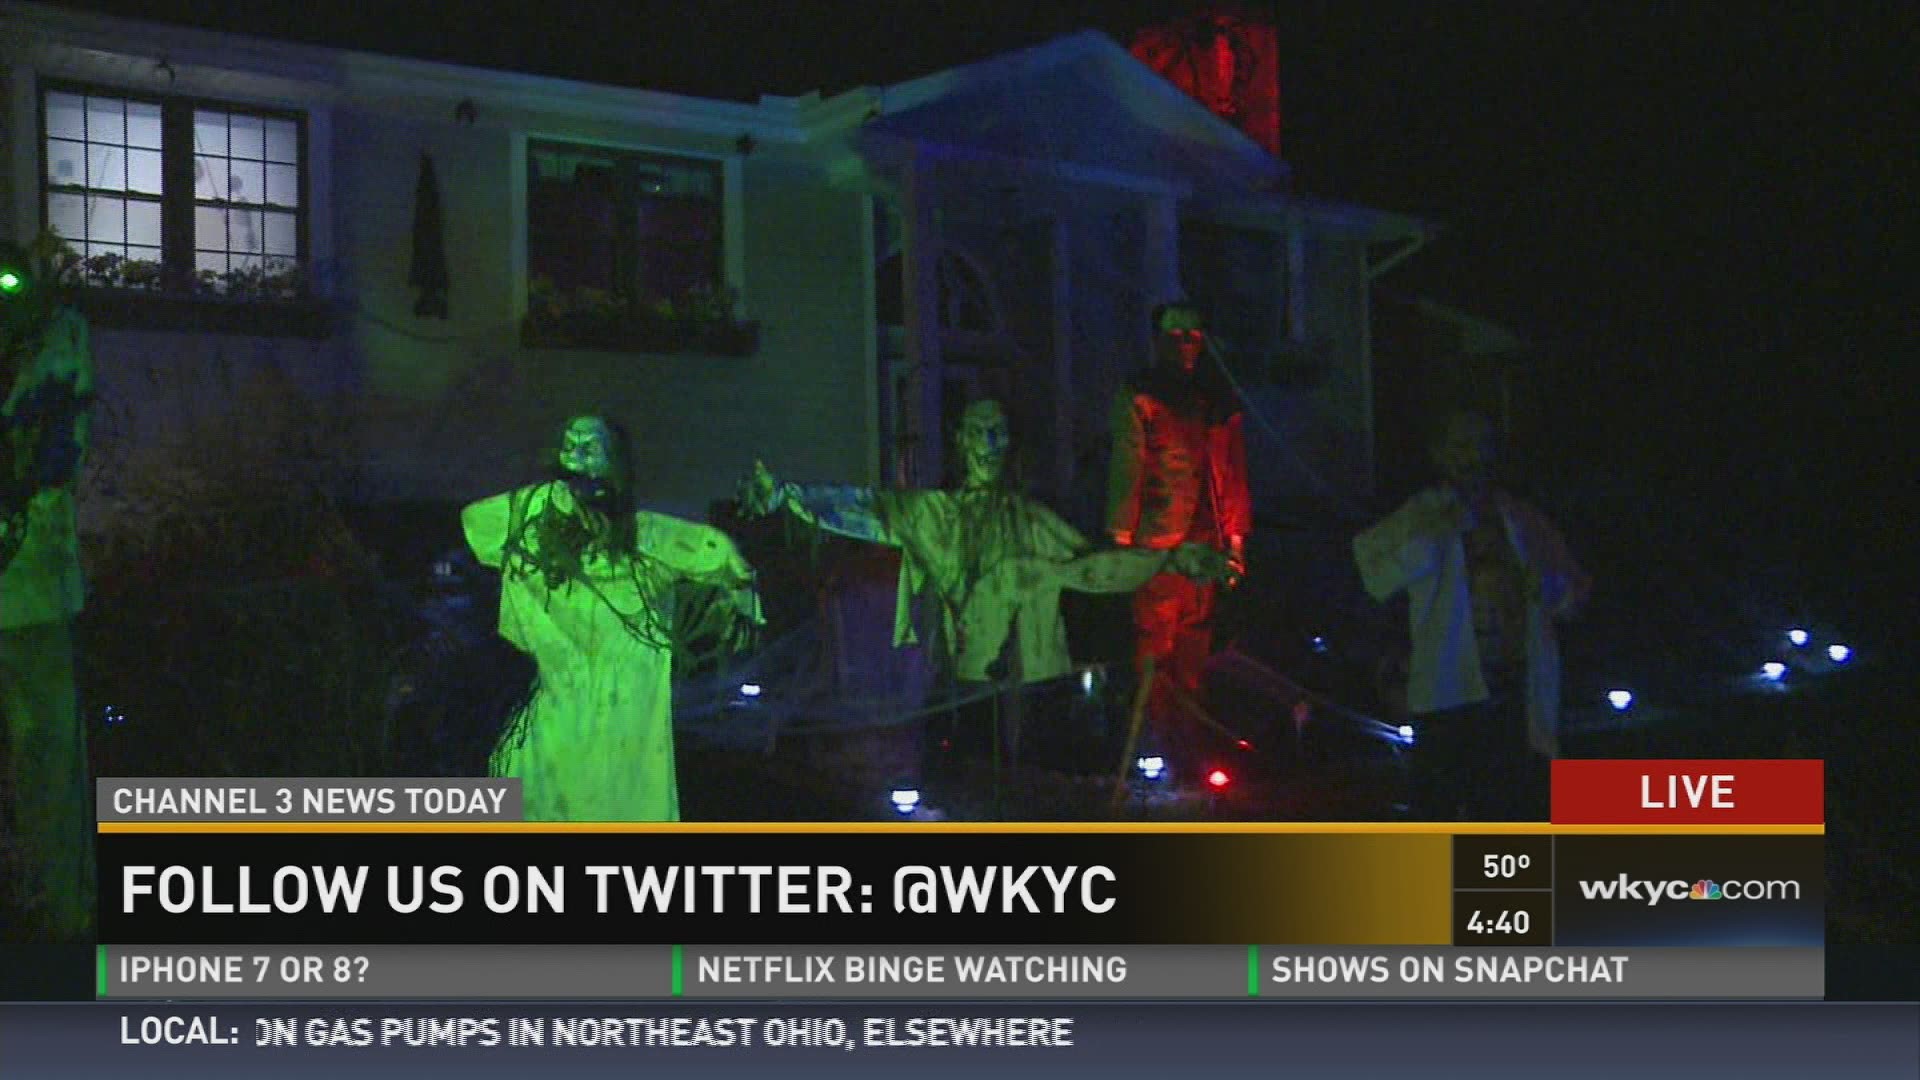 October 2017: Things have taken a terrifying twist on Albion Road in Strongsville. The Ward family is drawing crowds to their front yard where awesomely eerie Halloween decorations are on display. It's the family's 11th year decorating like this.